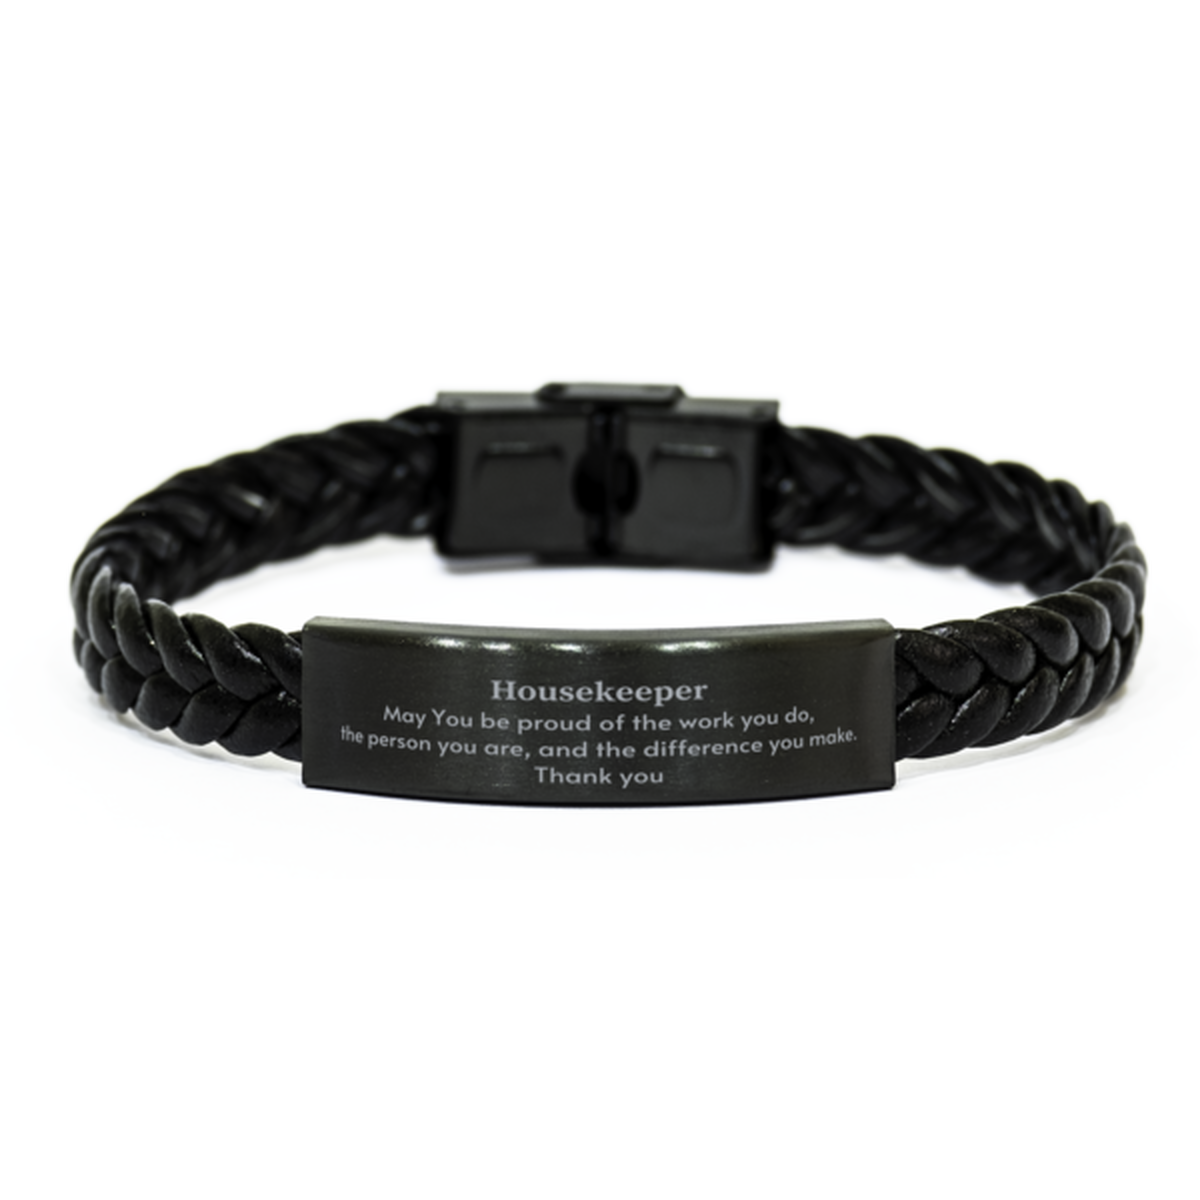 Heartwarming Braided Leather Bracelet Retirement Coworkers Gifts for Housekeeper, Housekeeper May You be proud of the work you do, the person you are Gifts for Boss Men Women Friends